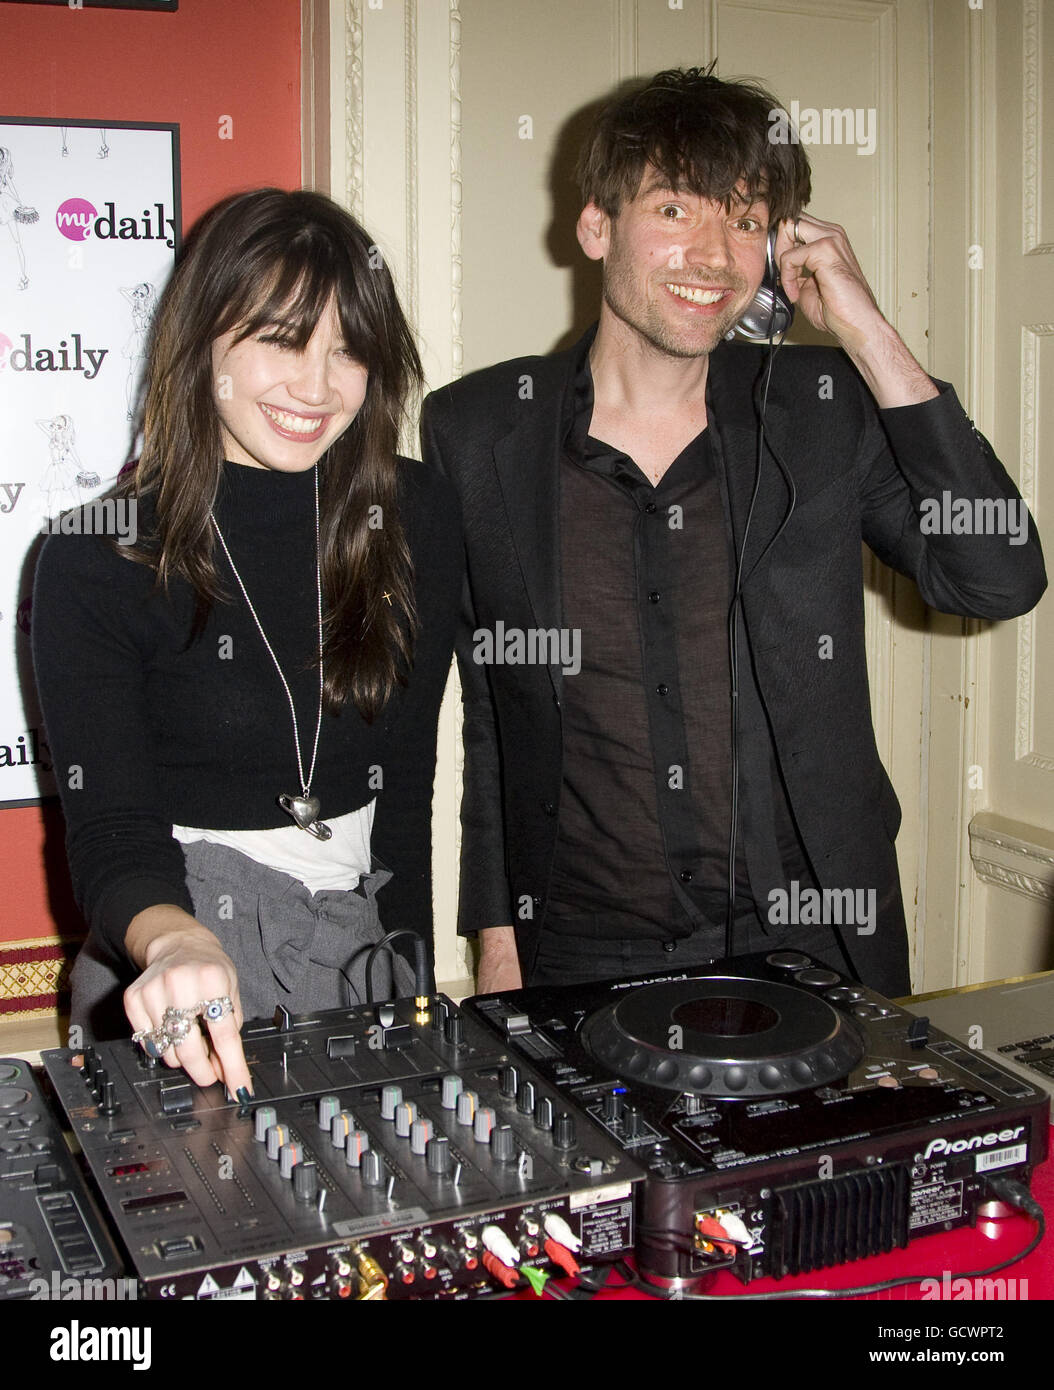 Daisy Lowe and Alex James attend the launch party of Mydaily.co.uk at the House of St Barnabas, Soho Square, London. Stock Photo